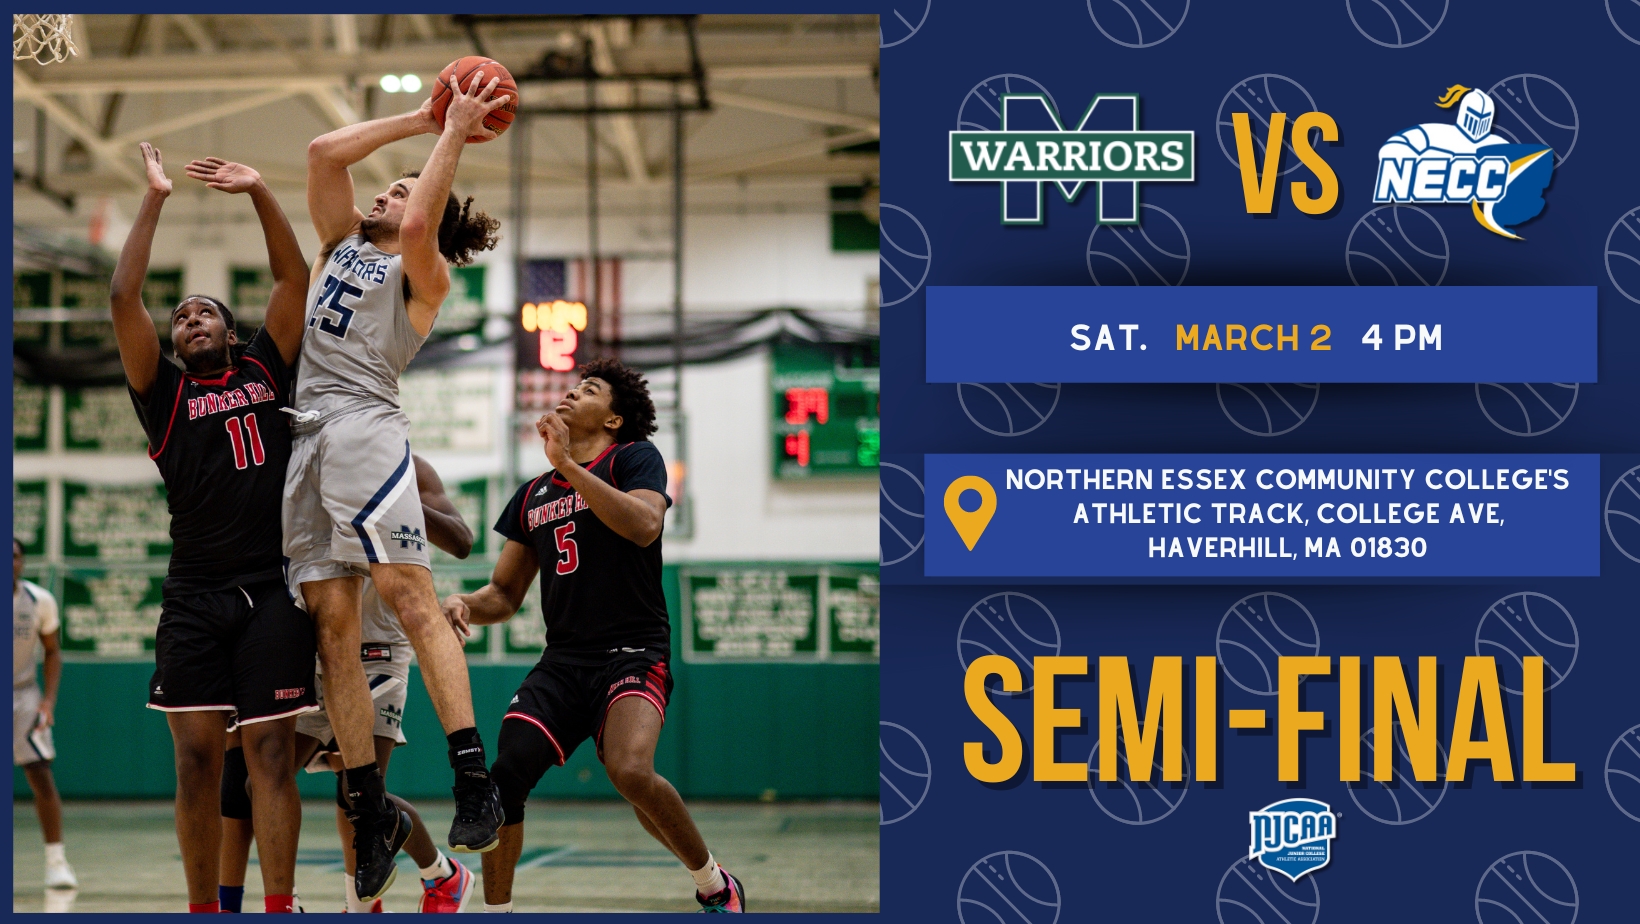 Massasoit Men's Basketball advances to the Semi-Finals at Northern Essex CC following an 88-77 victory over Bristol CC on Wednesday, February 28th.